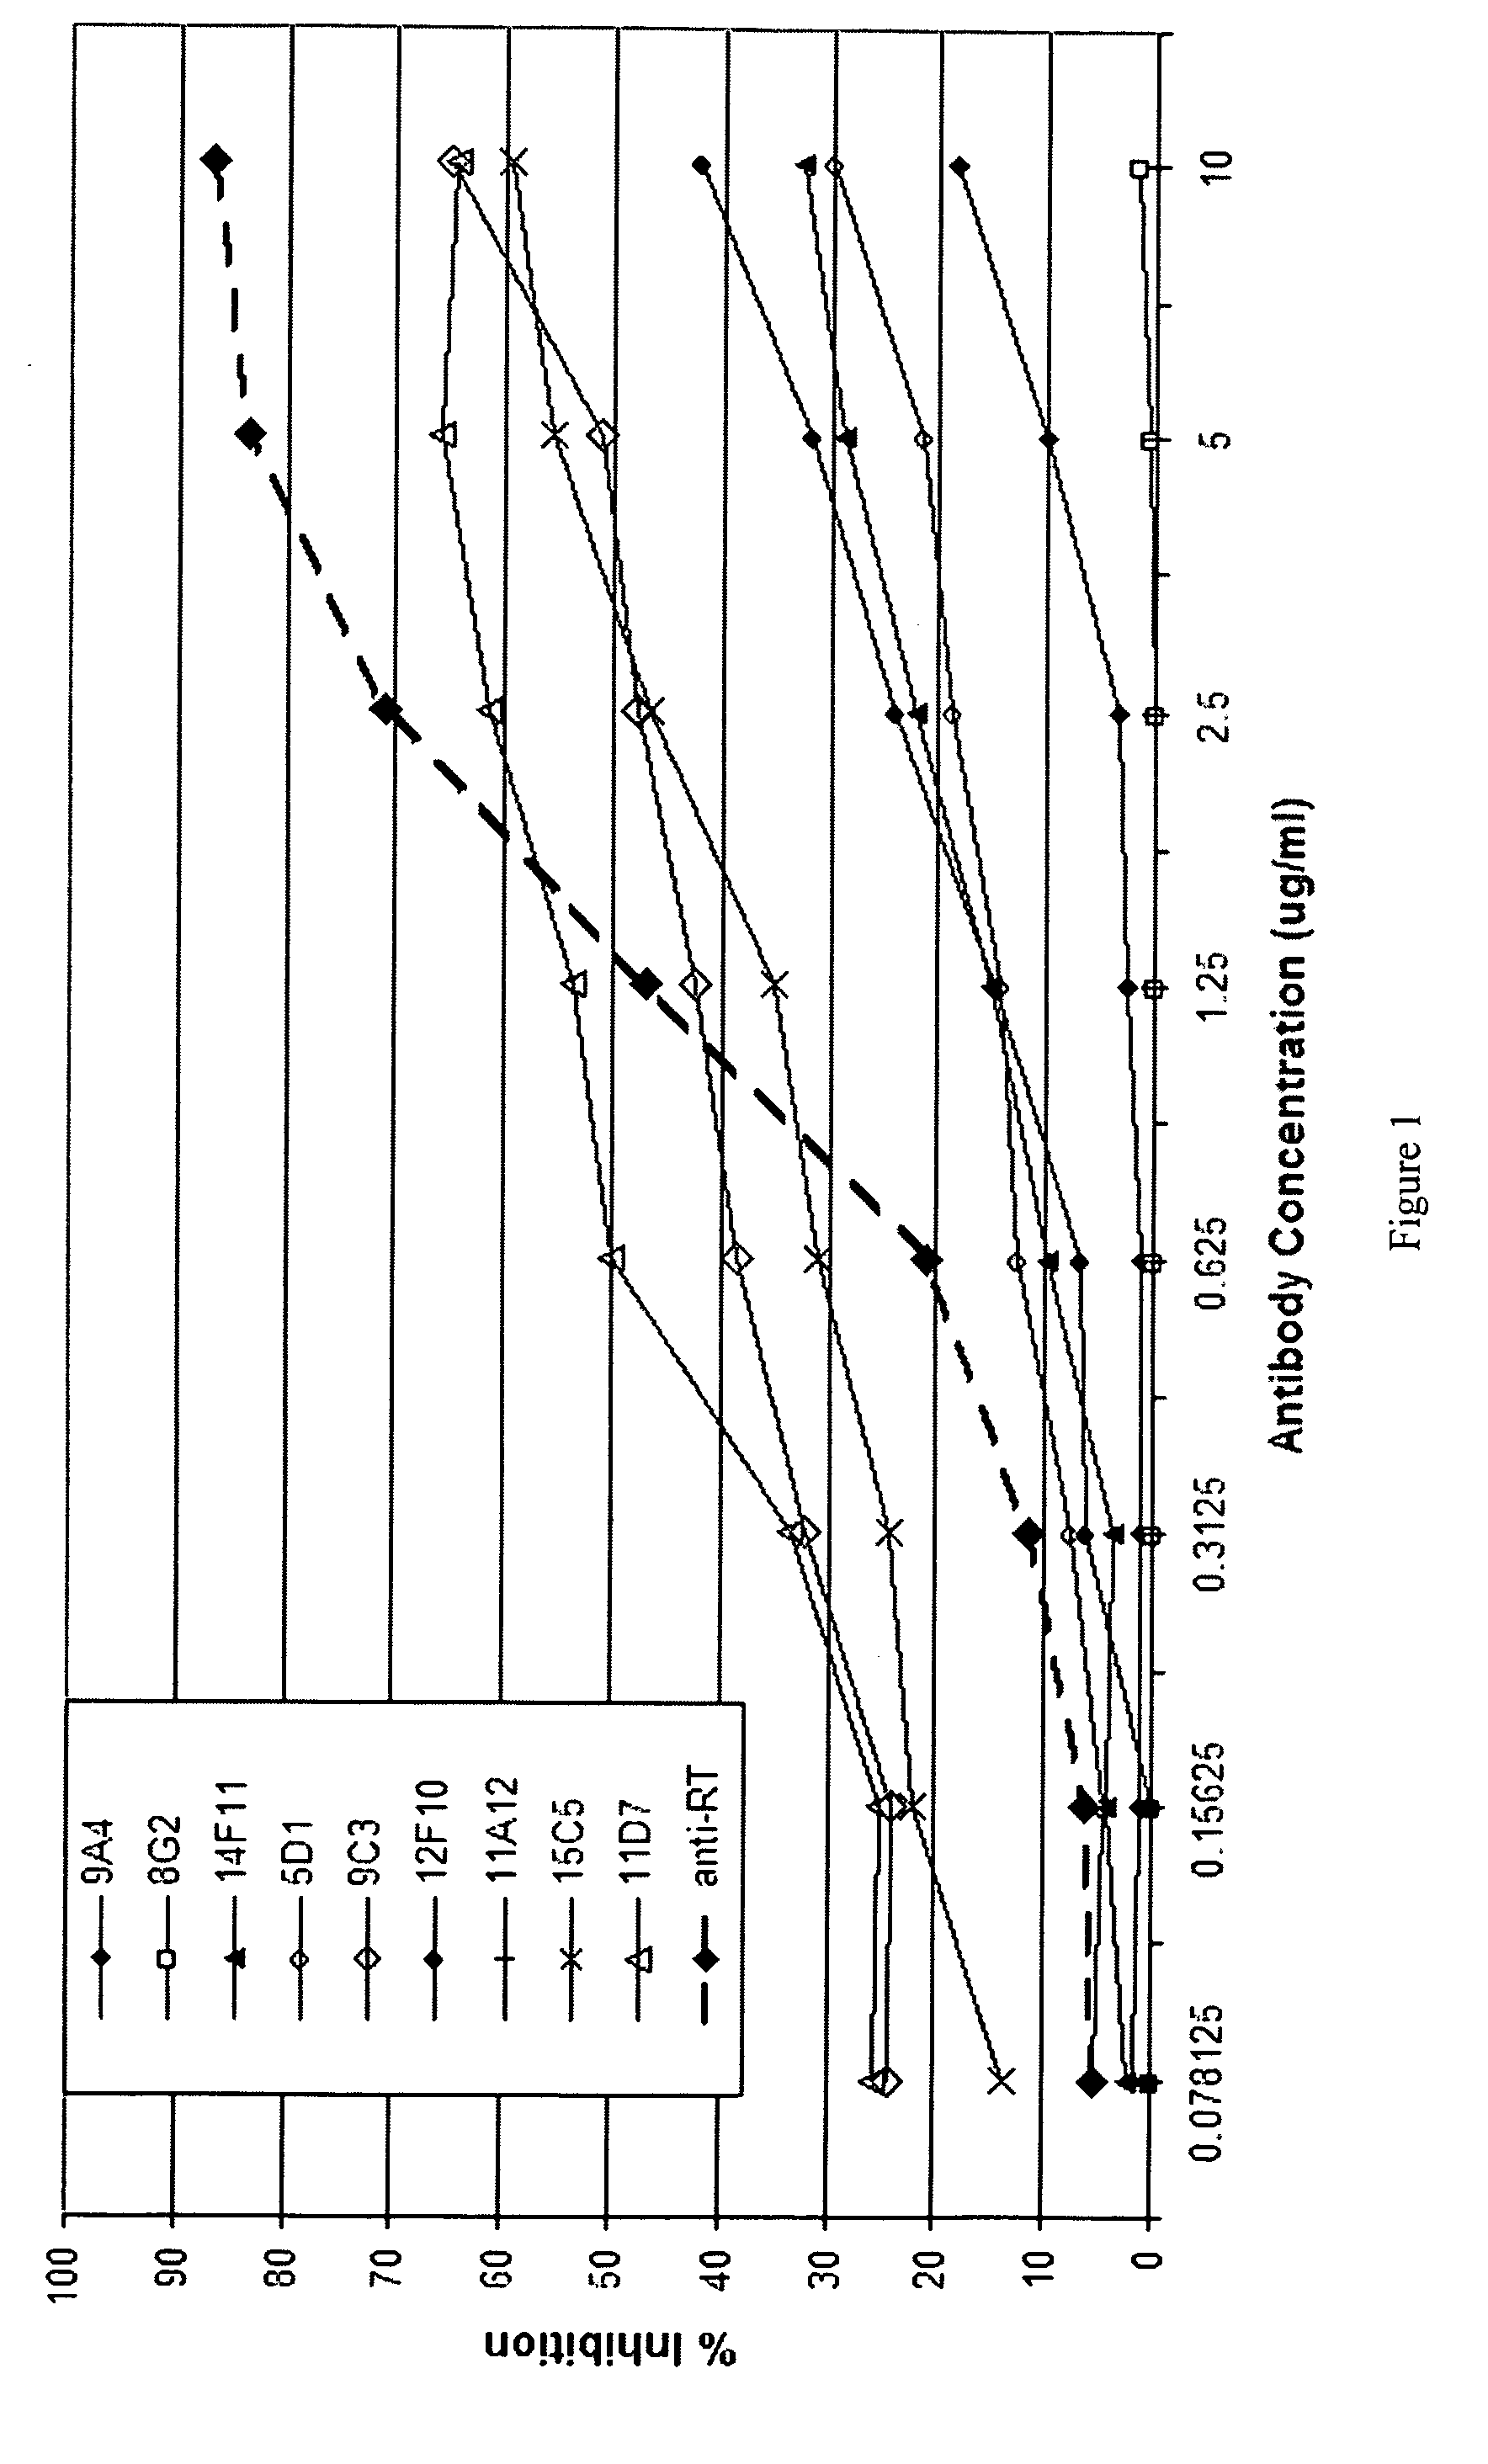 Monoclonal antibodies against ricin toxin and methods of making and using thereof